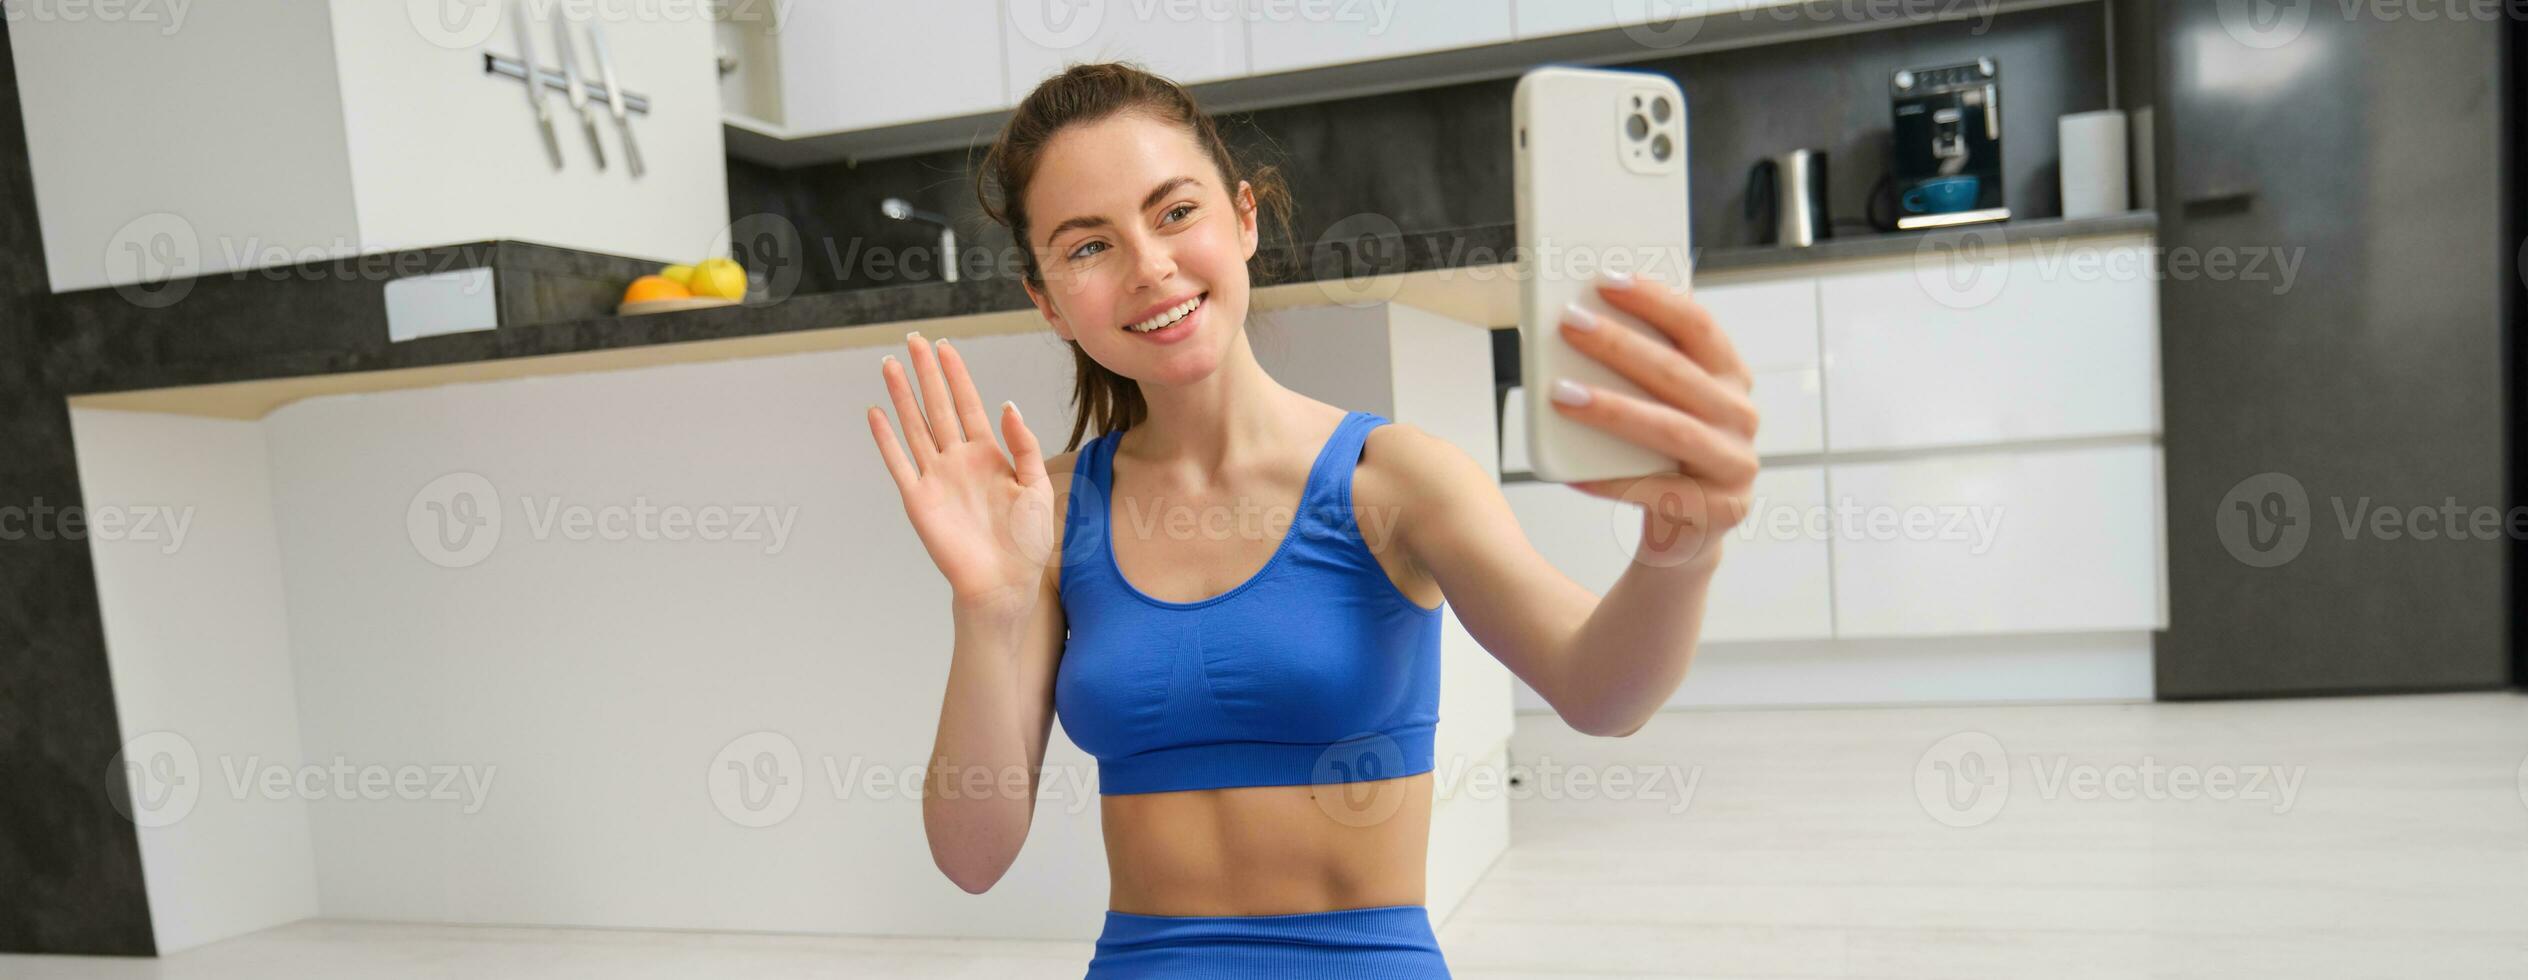 Smiling beautiful girl records video while doing sports at home, looks at smartphone, takes selfie on mobile phone, workout indoors in blue leggings and sportsbra photo